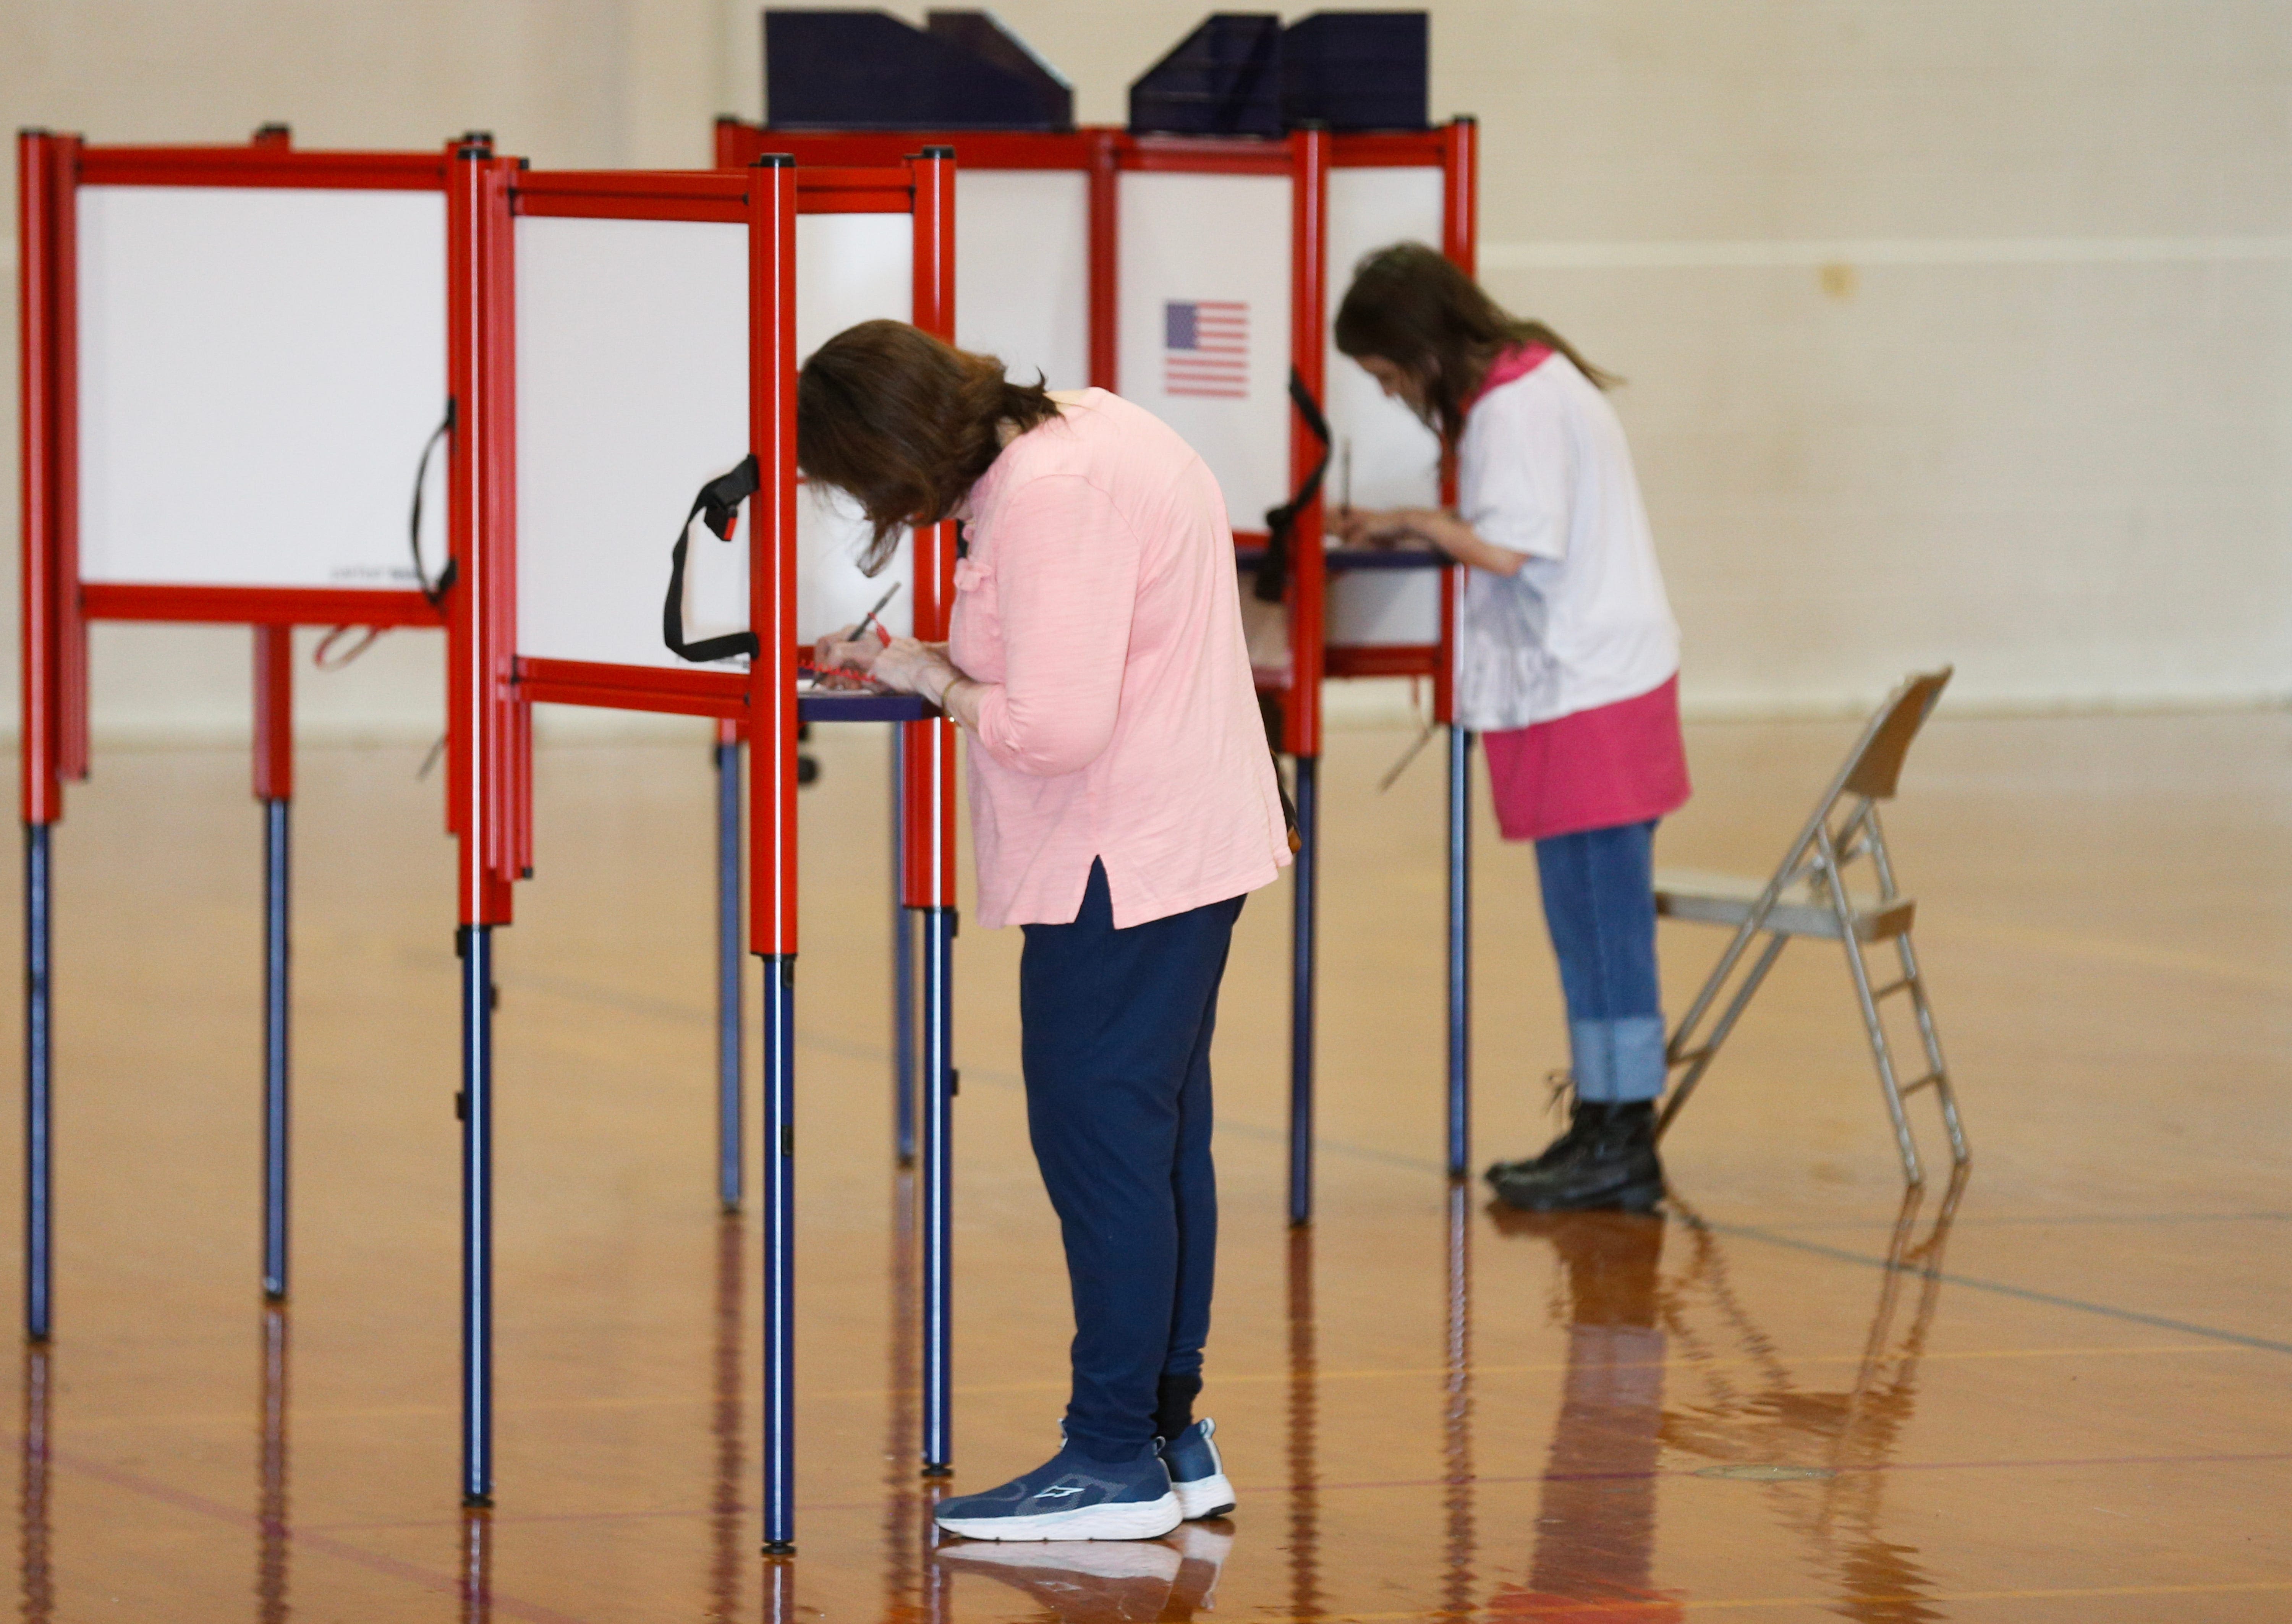 Primary Election Day in Kentucky has arrived. What to know about voting in Louisville